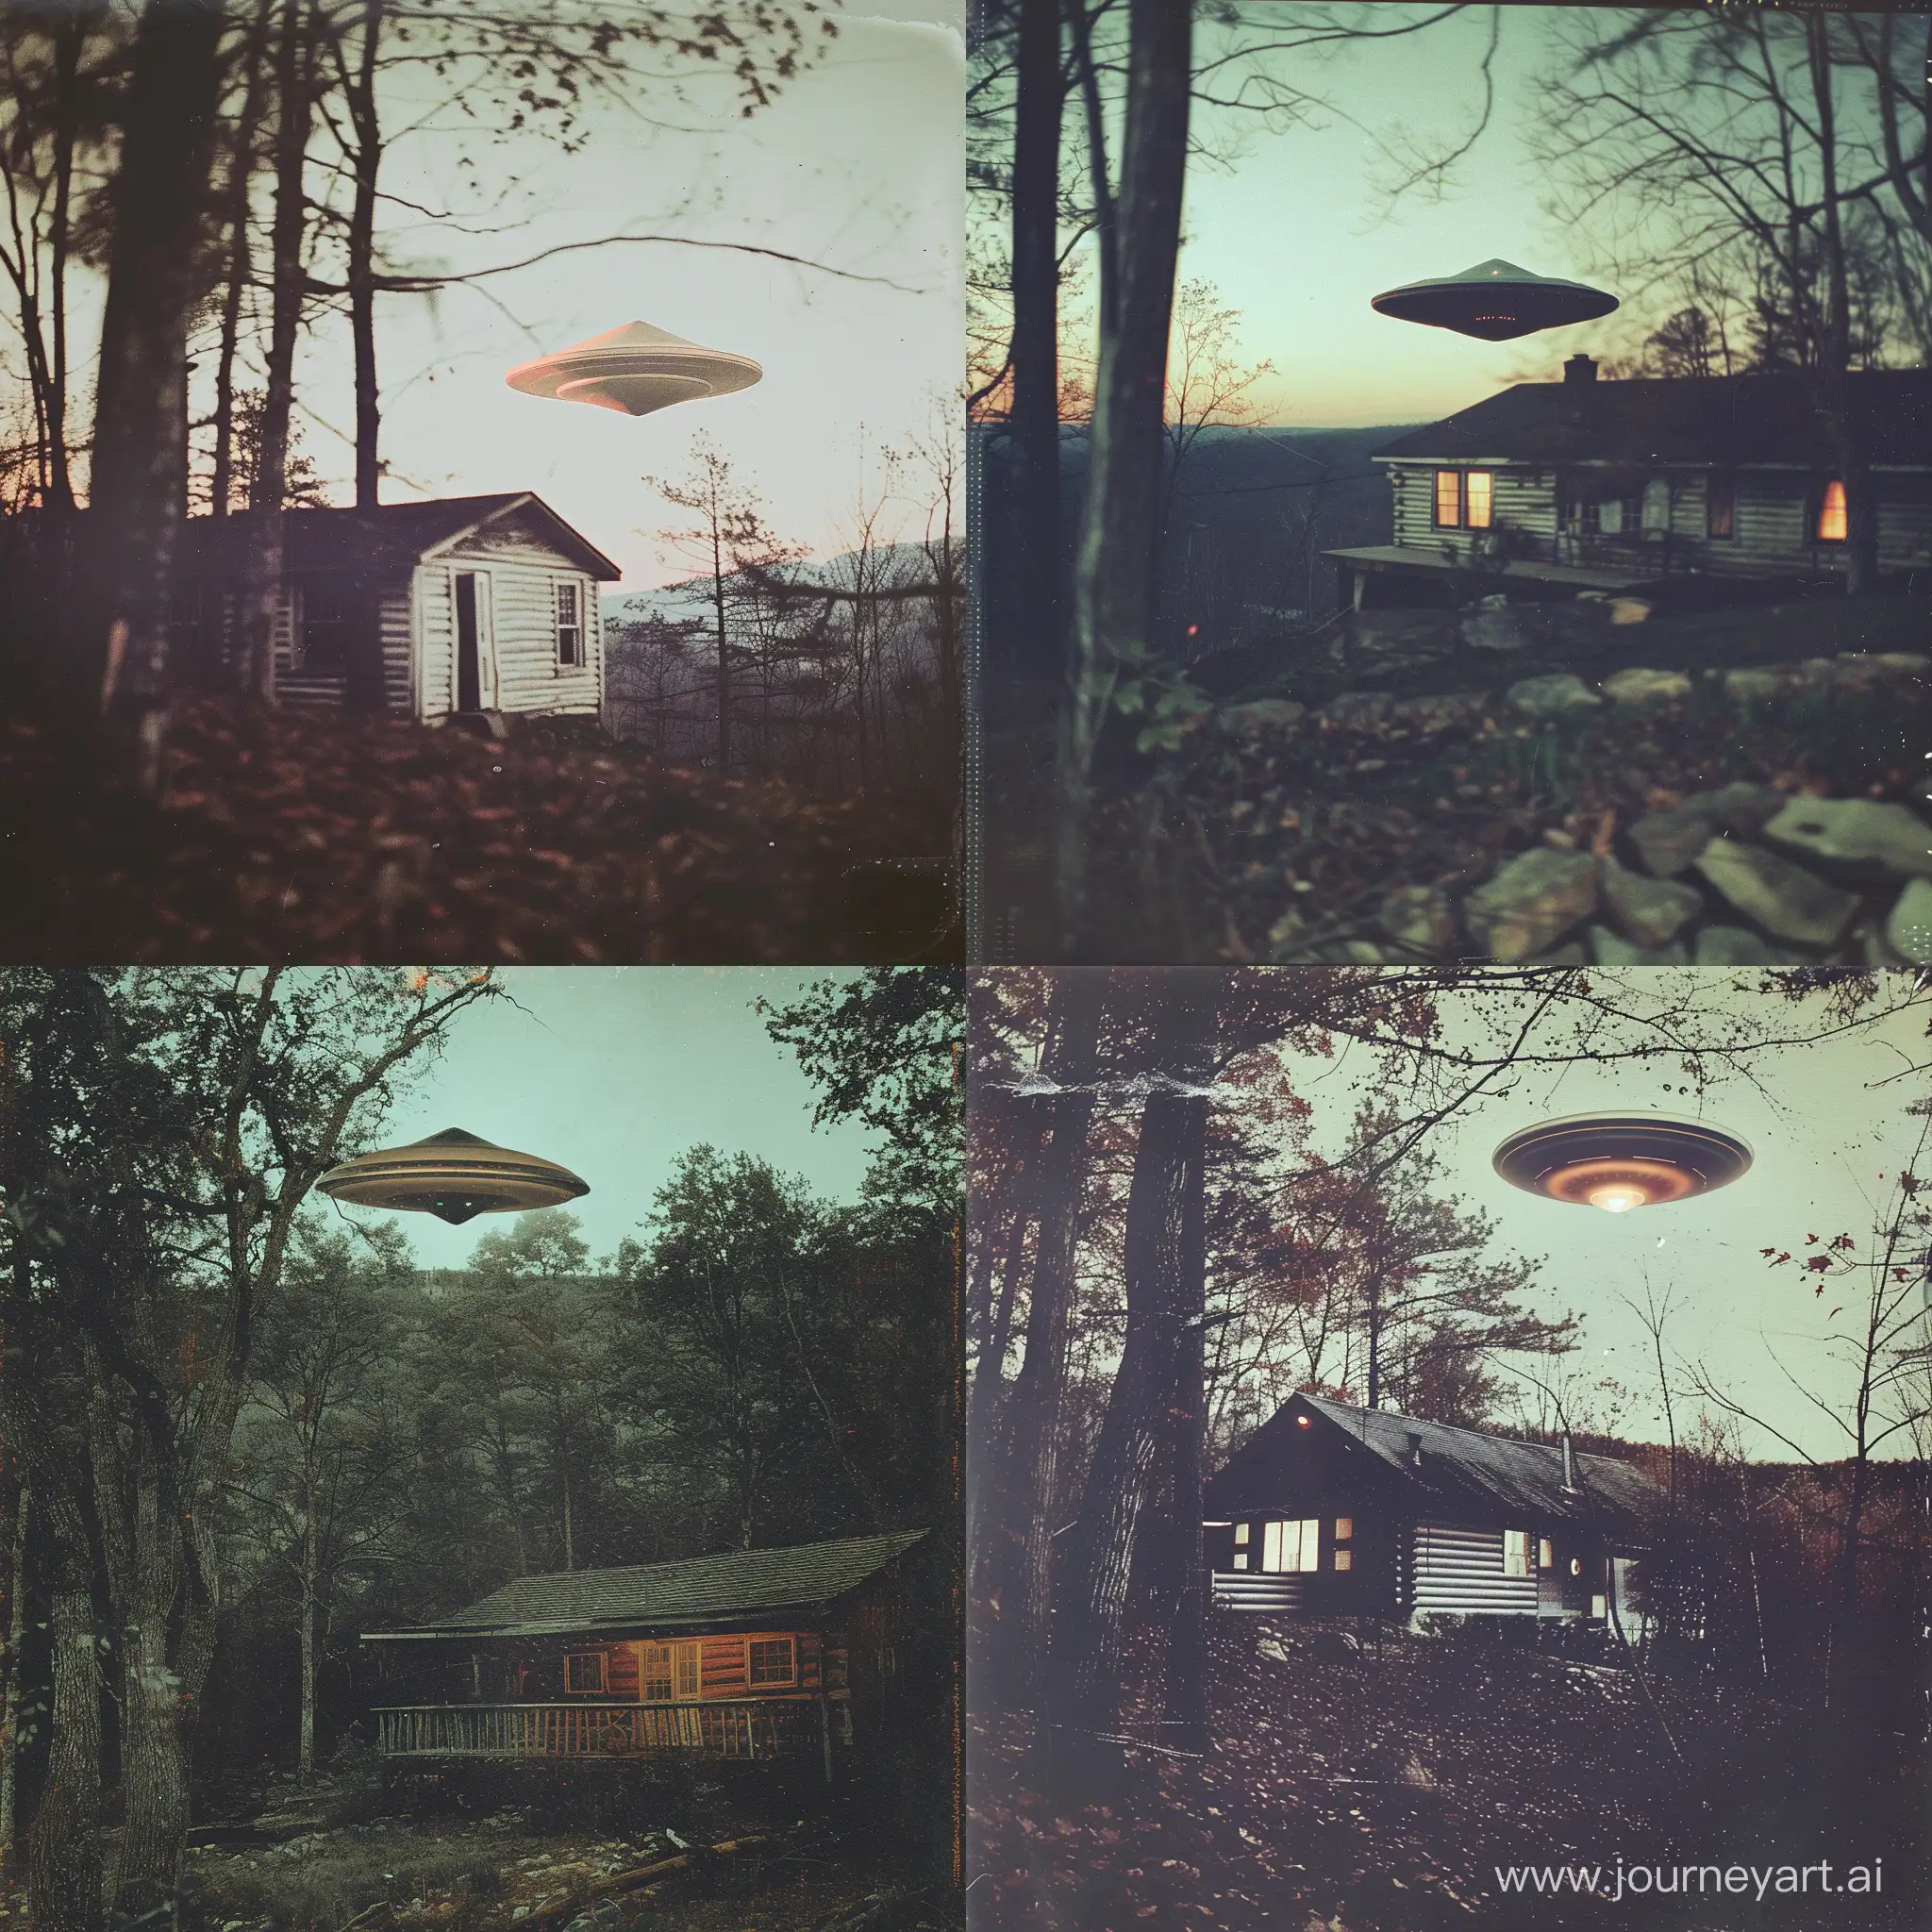 Mysterious-Triangle-UFO-Hovering-Above-Rustic-Cabin-in-Twilight